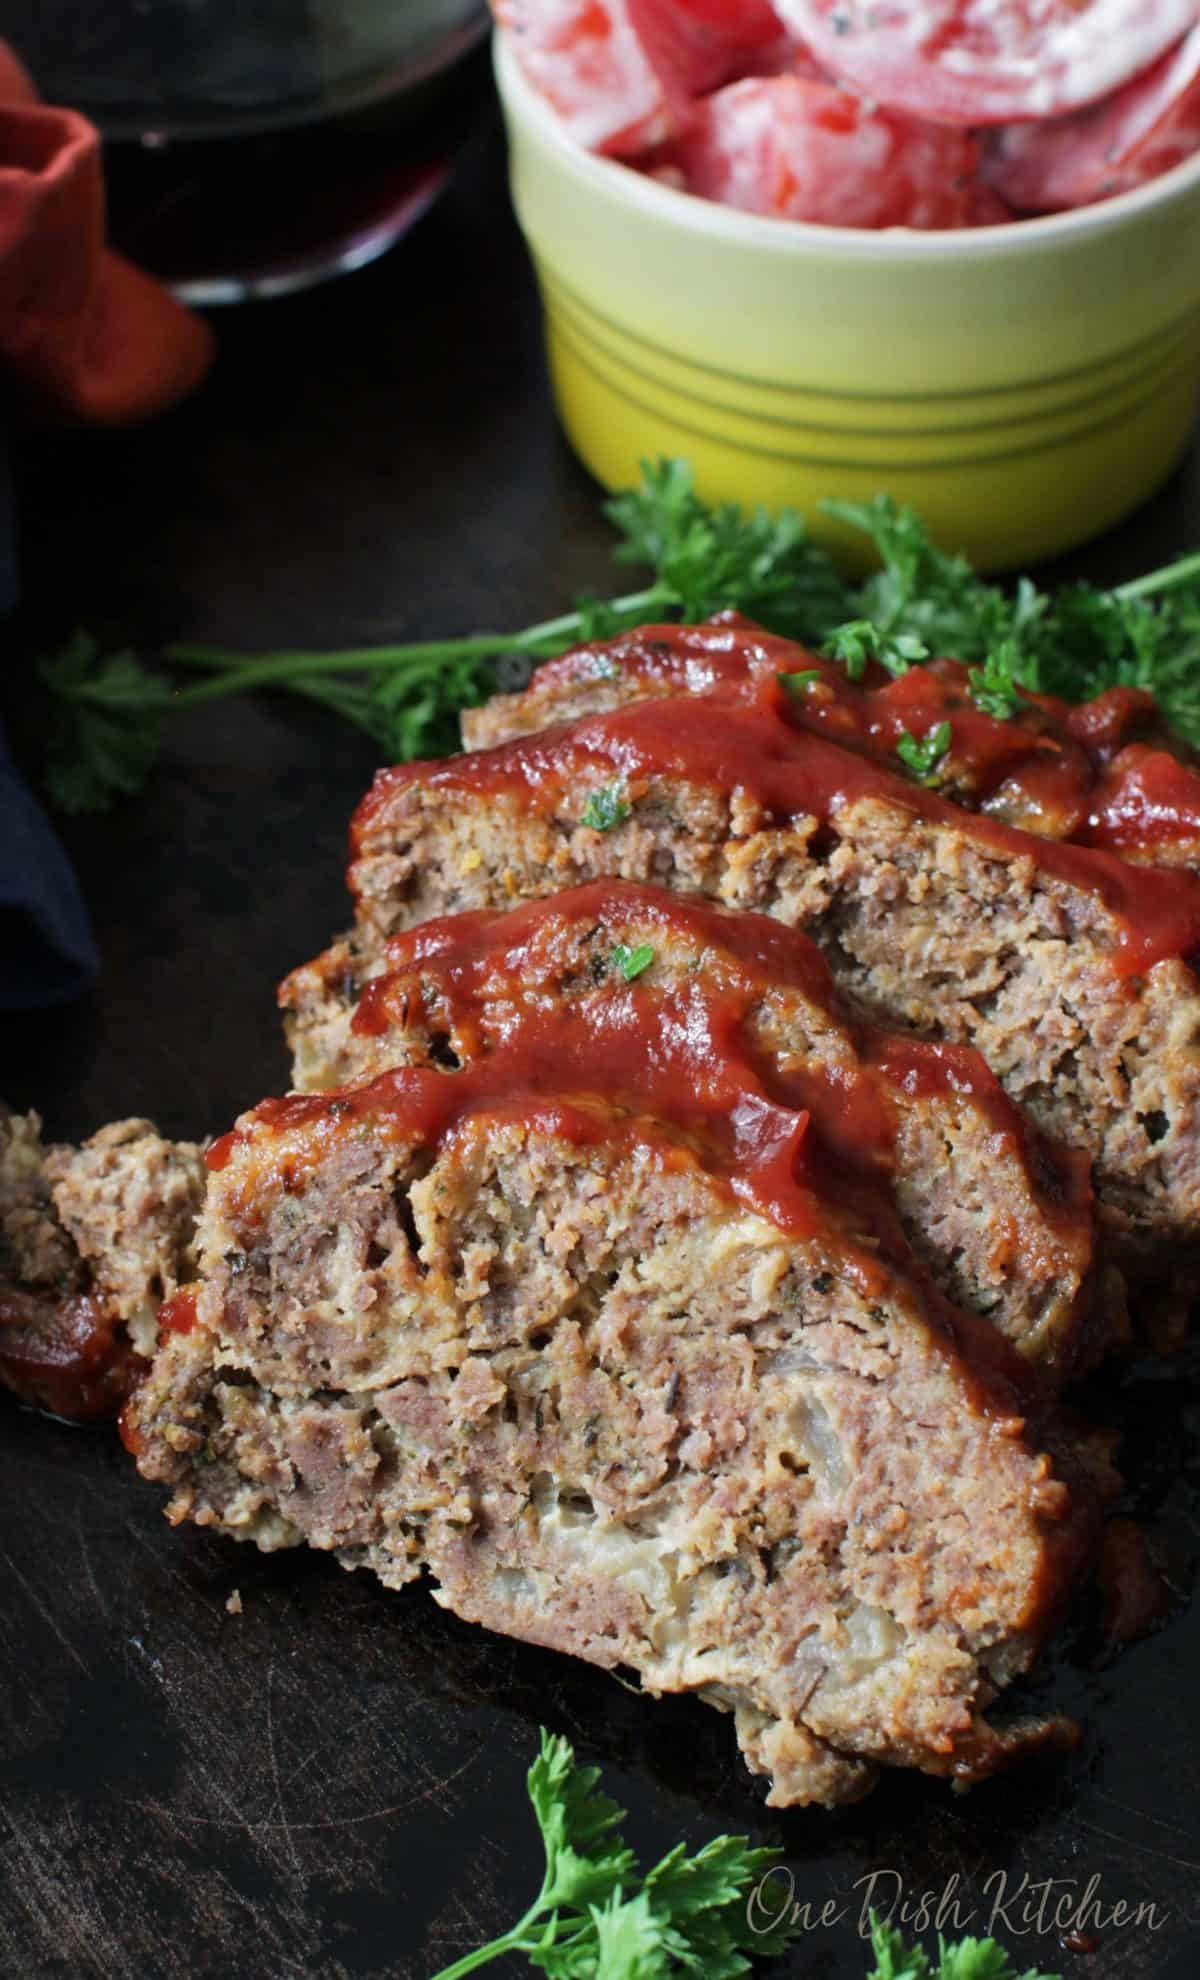 Meatloaf sliced into four slices on a dark wooden tray next to a small bowl of tomato slices with ranch dressing.